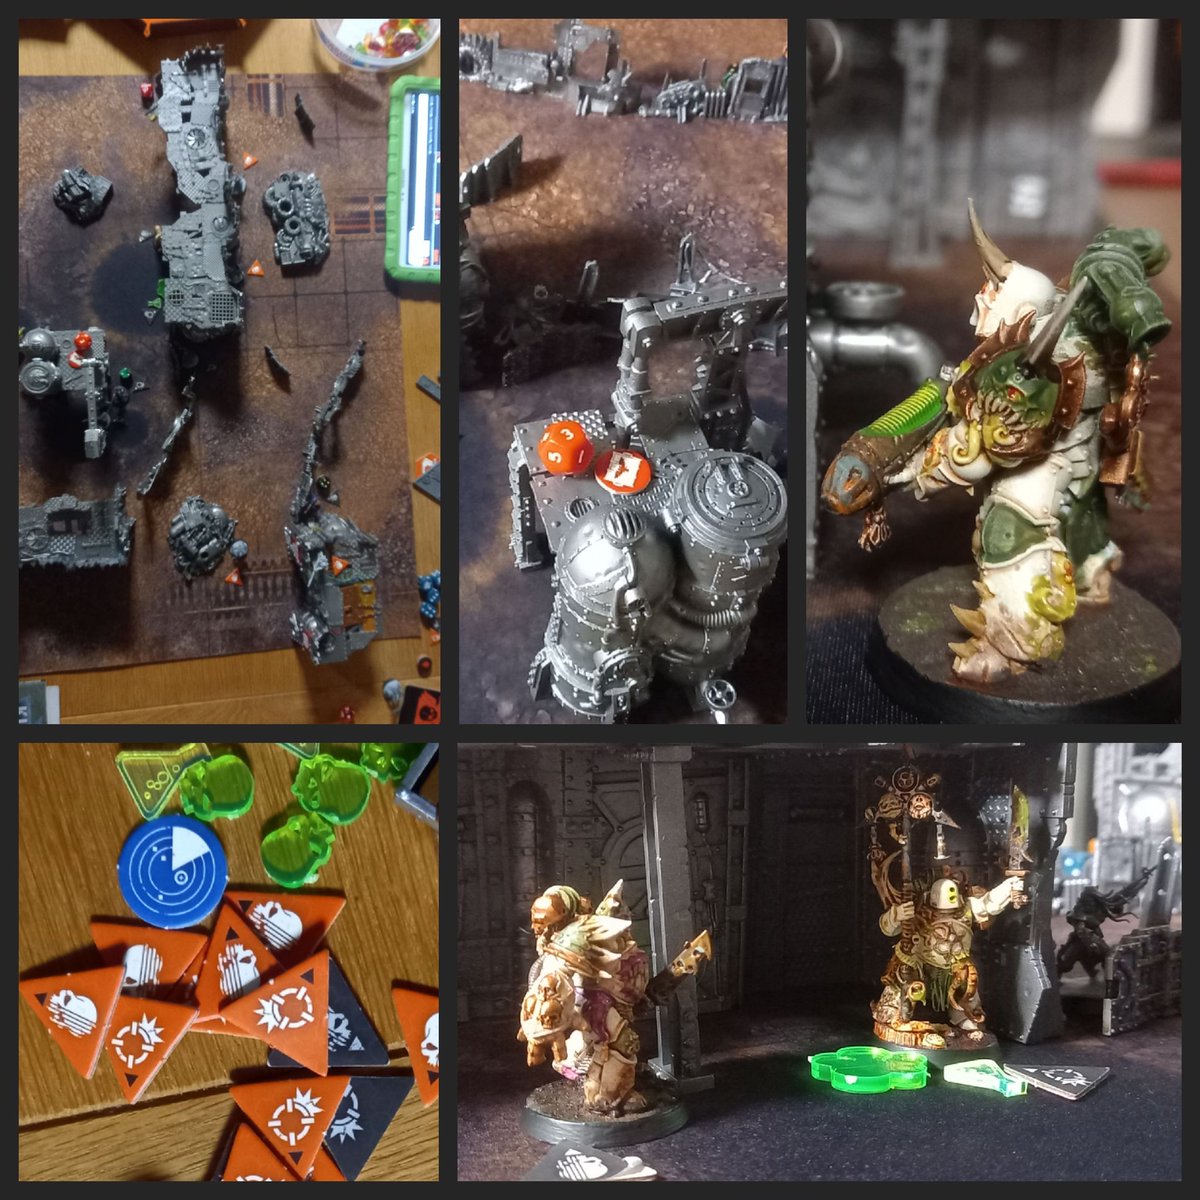 Games night, and the wh40k Kill Team campaign continues wiyh my Chaos Legionnaires into some pesky Drukhari. Drukhari took the win 🥺

#killteam #Drukhari #chaos #wh40k #warhammer #warhammer40000   #boardgame #tabletopgame #game #gamenight #gaming #miniaturegaming